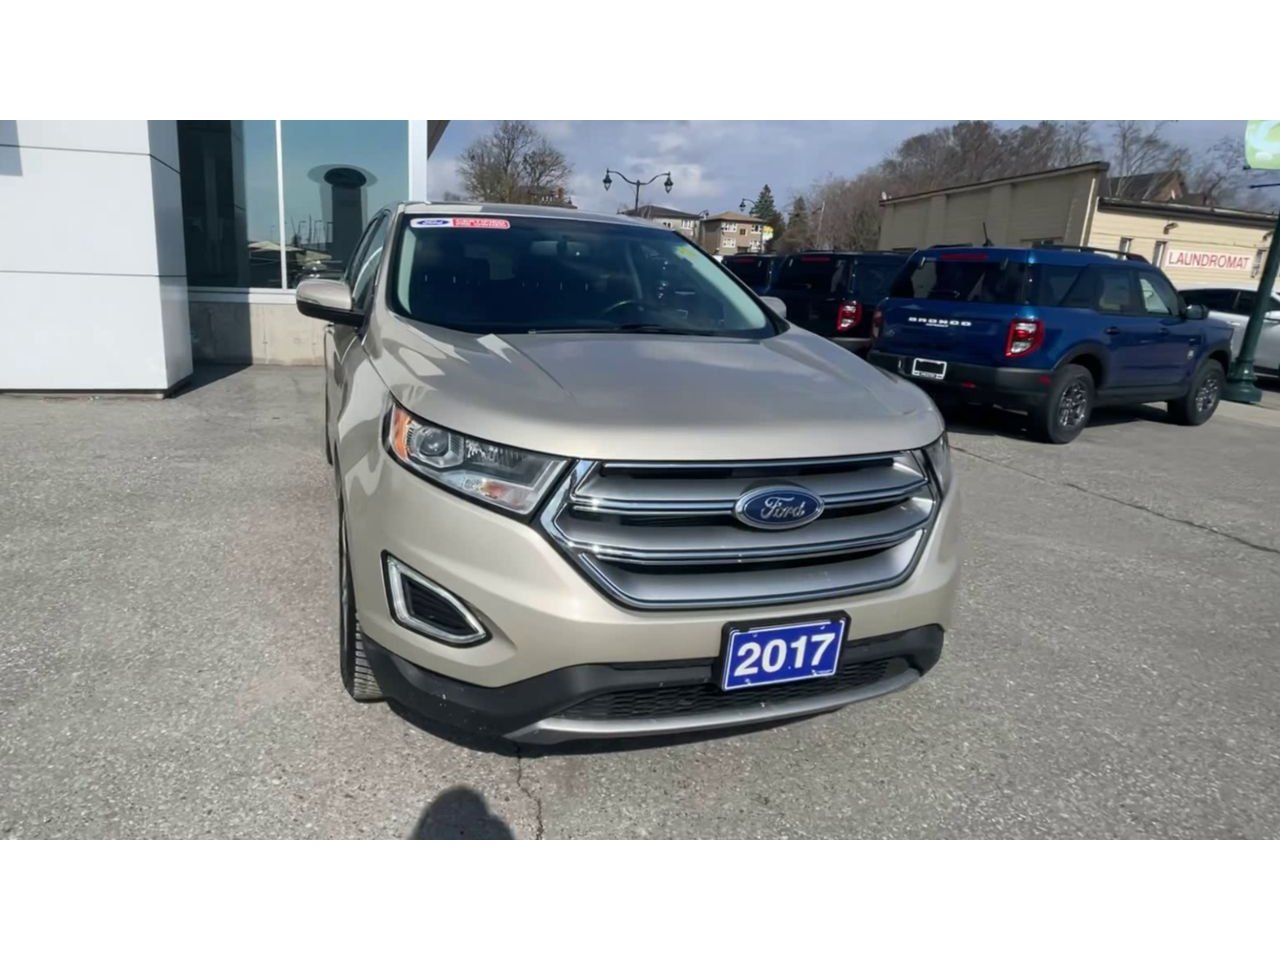 2017 Ford Edge - 21473A Full Image 3